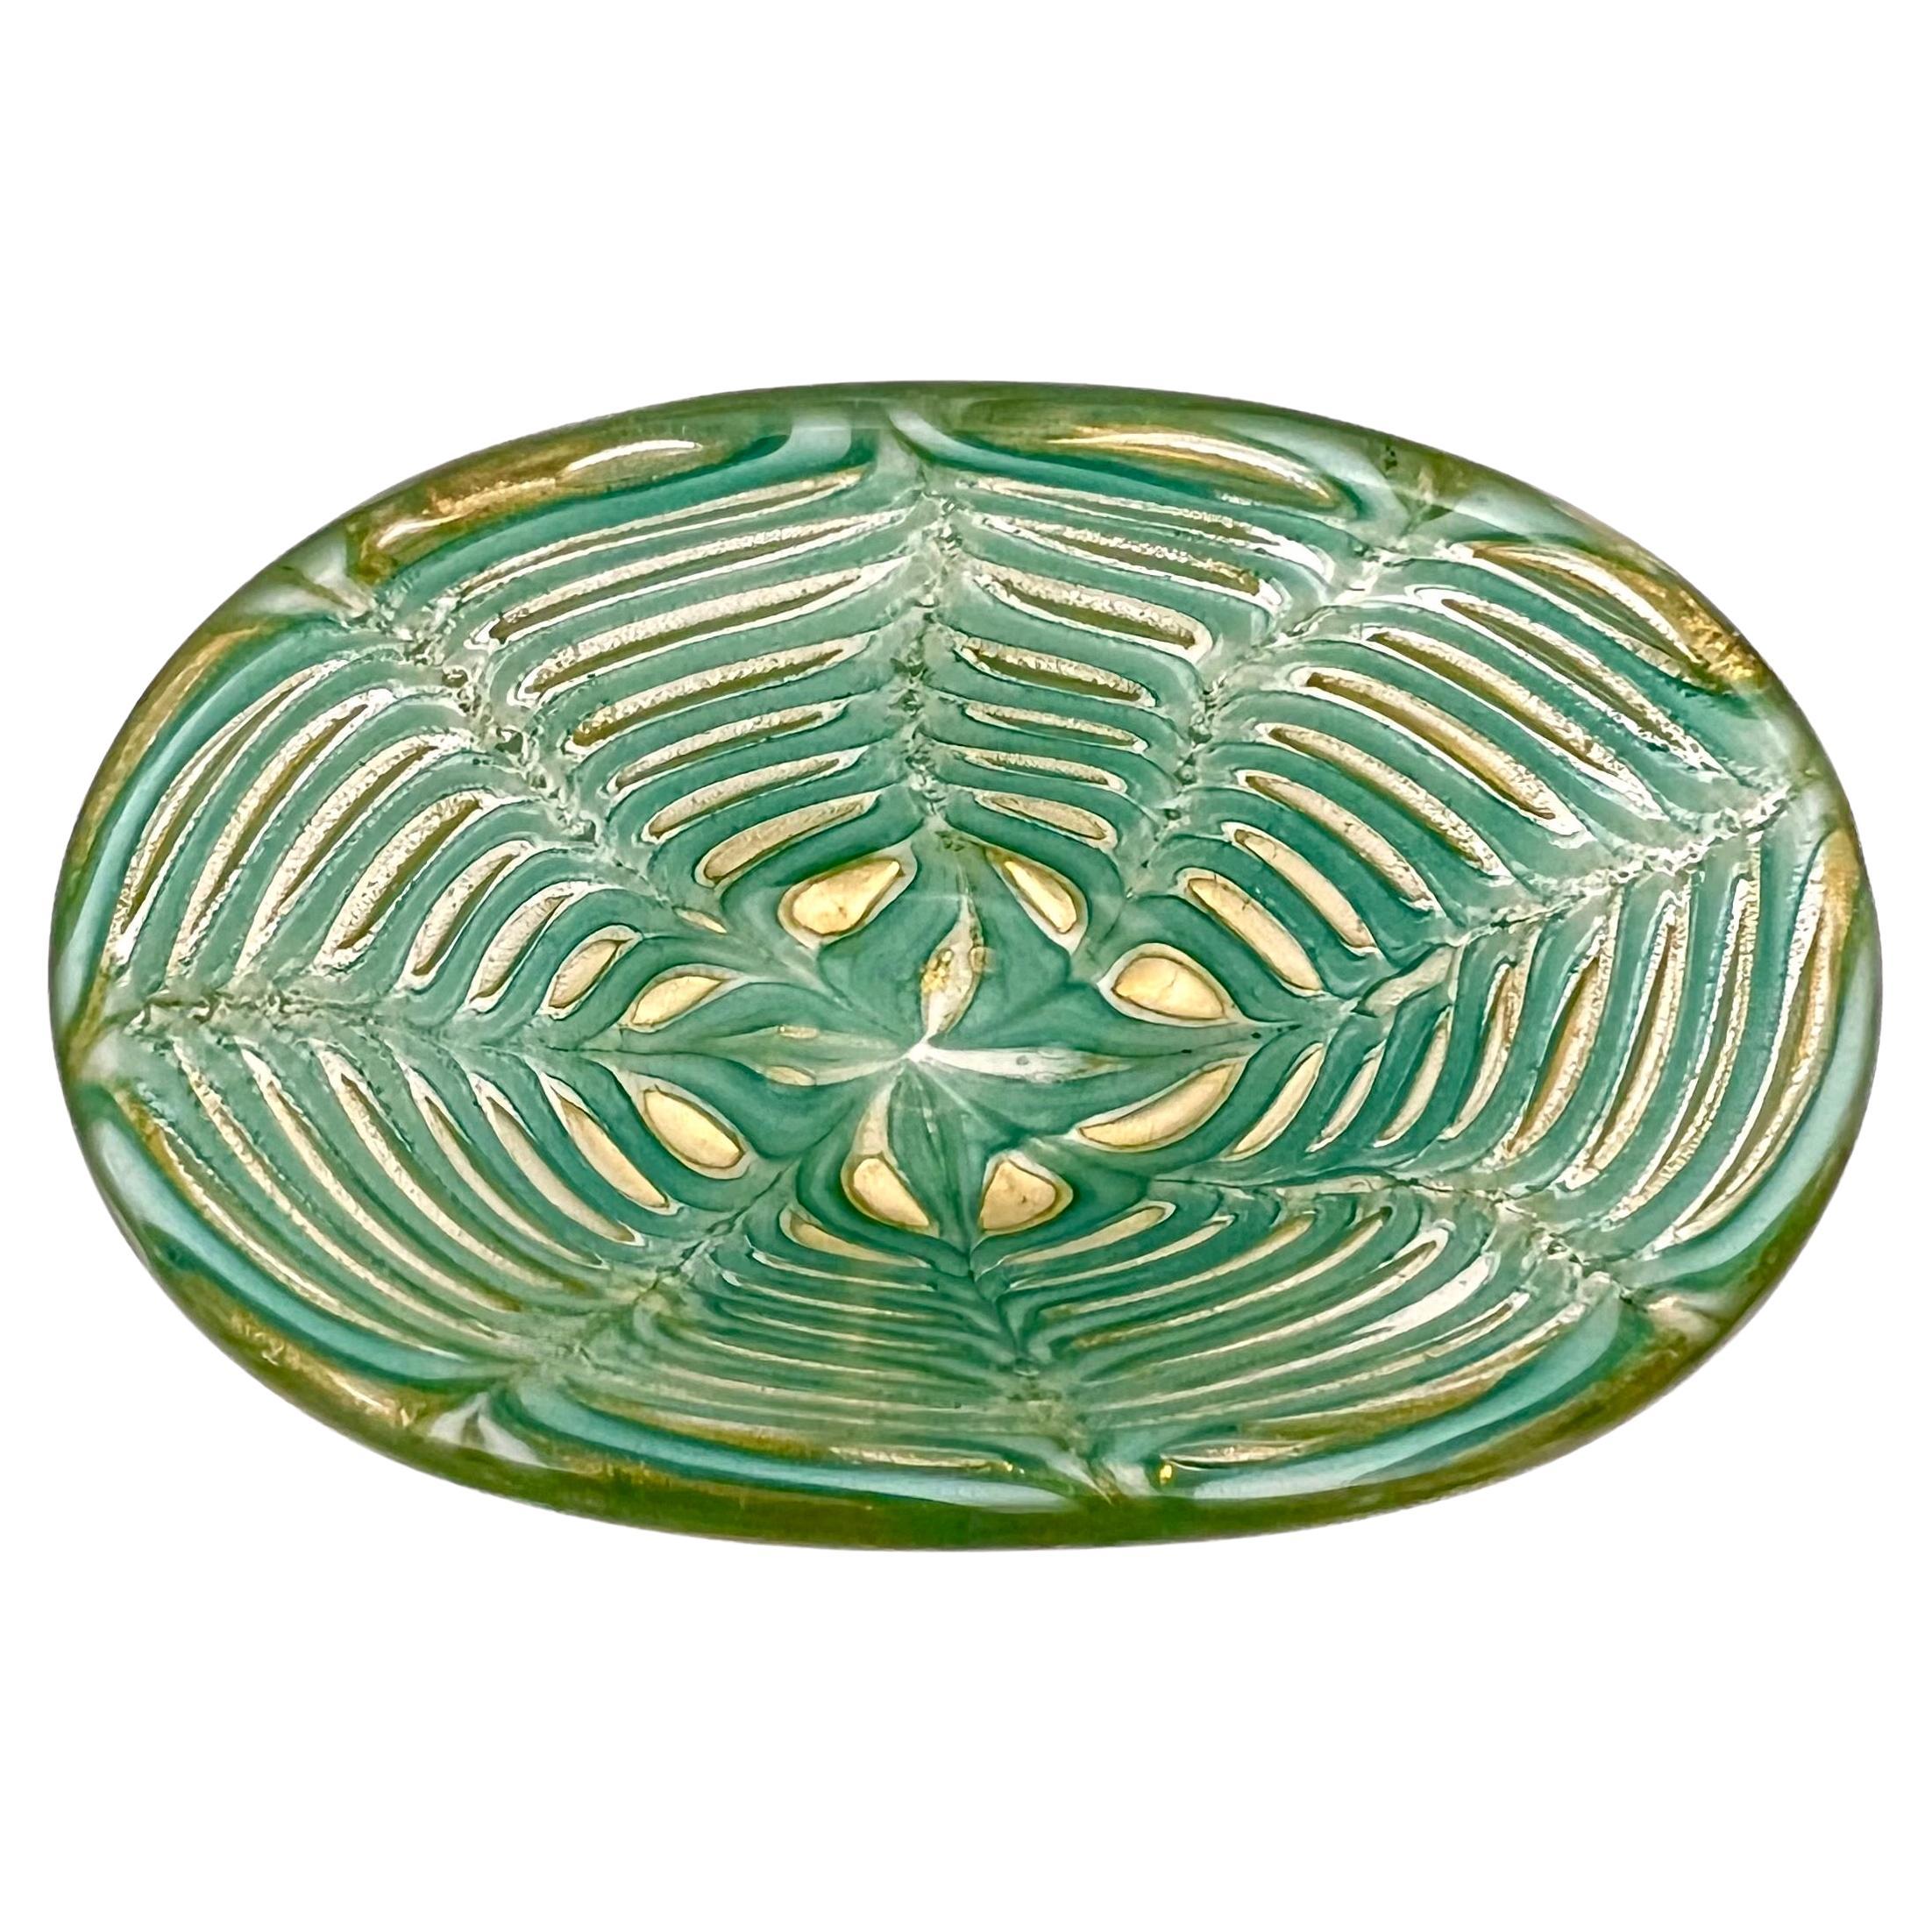 Ercole Barovier Murano Green and Gold Leaf Graffito Bowl In Good Condition For Sale In New York, NY